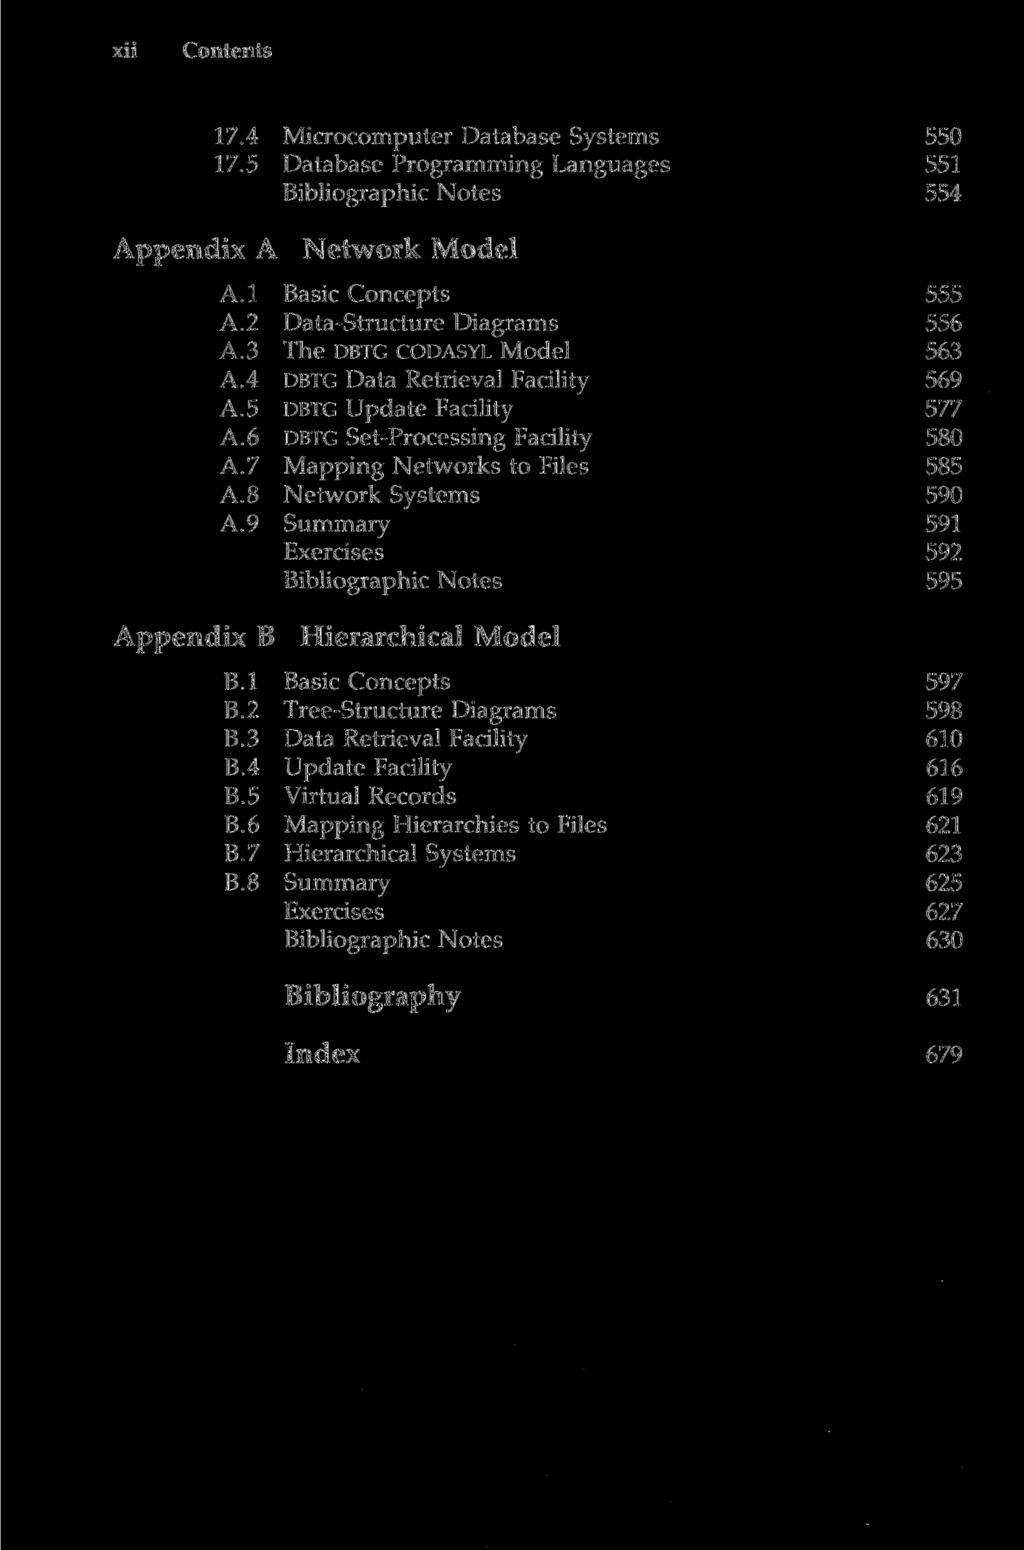 xii Contents 17.4 Microcomputer Database Systems 550 17.5 Database Programming Languages 551 554 Appendix A Network Model A.l A.2 A.3 A.4 A.5 A.6 A.7 A.8 A.9 Appendix B 1 Hierarchical Model B.l B.2 B.